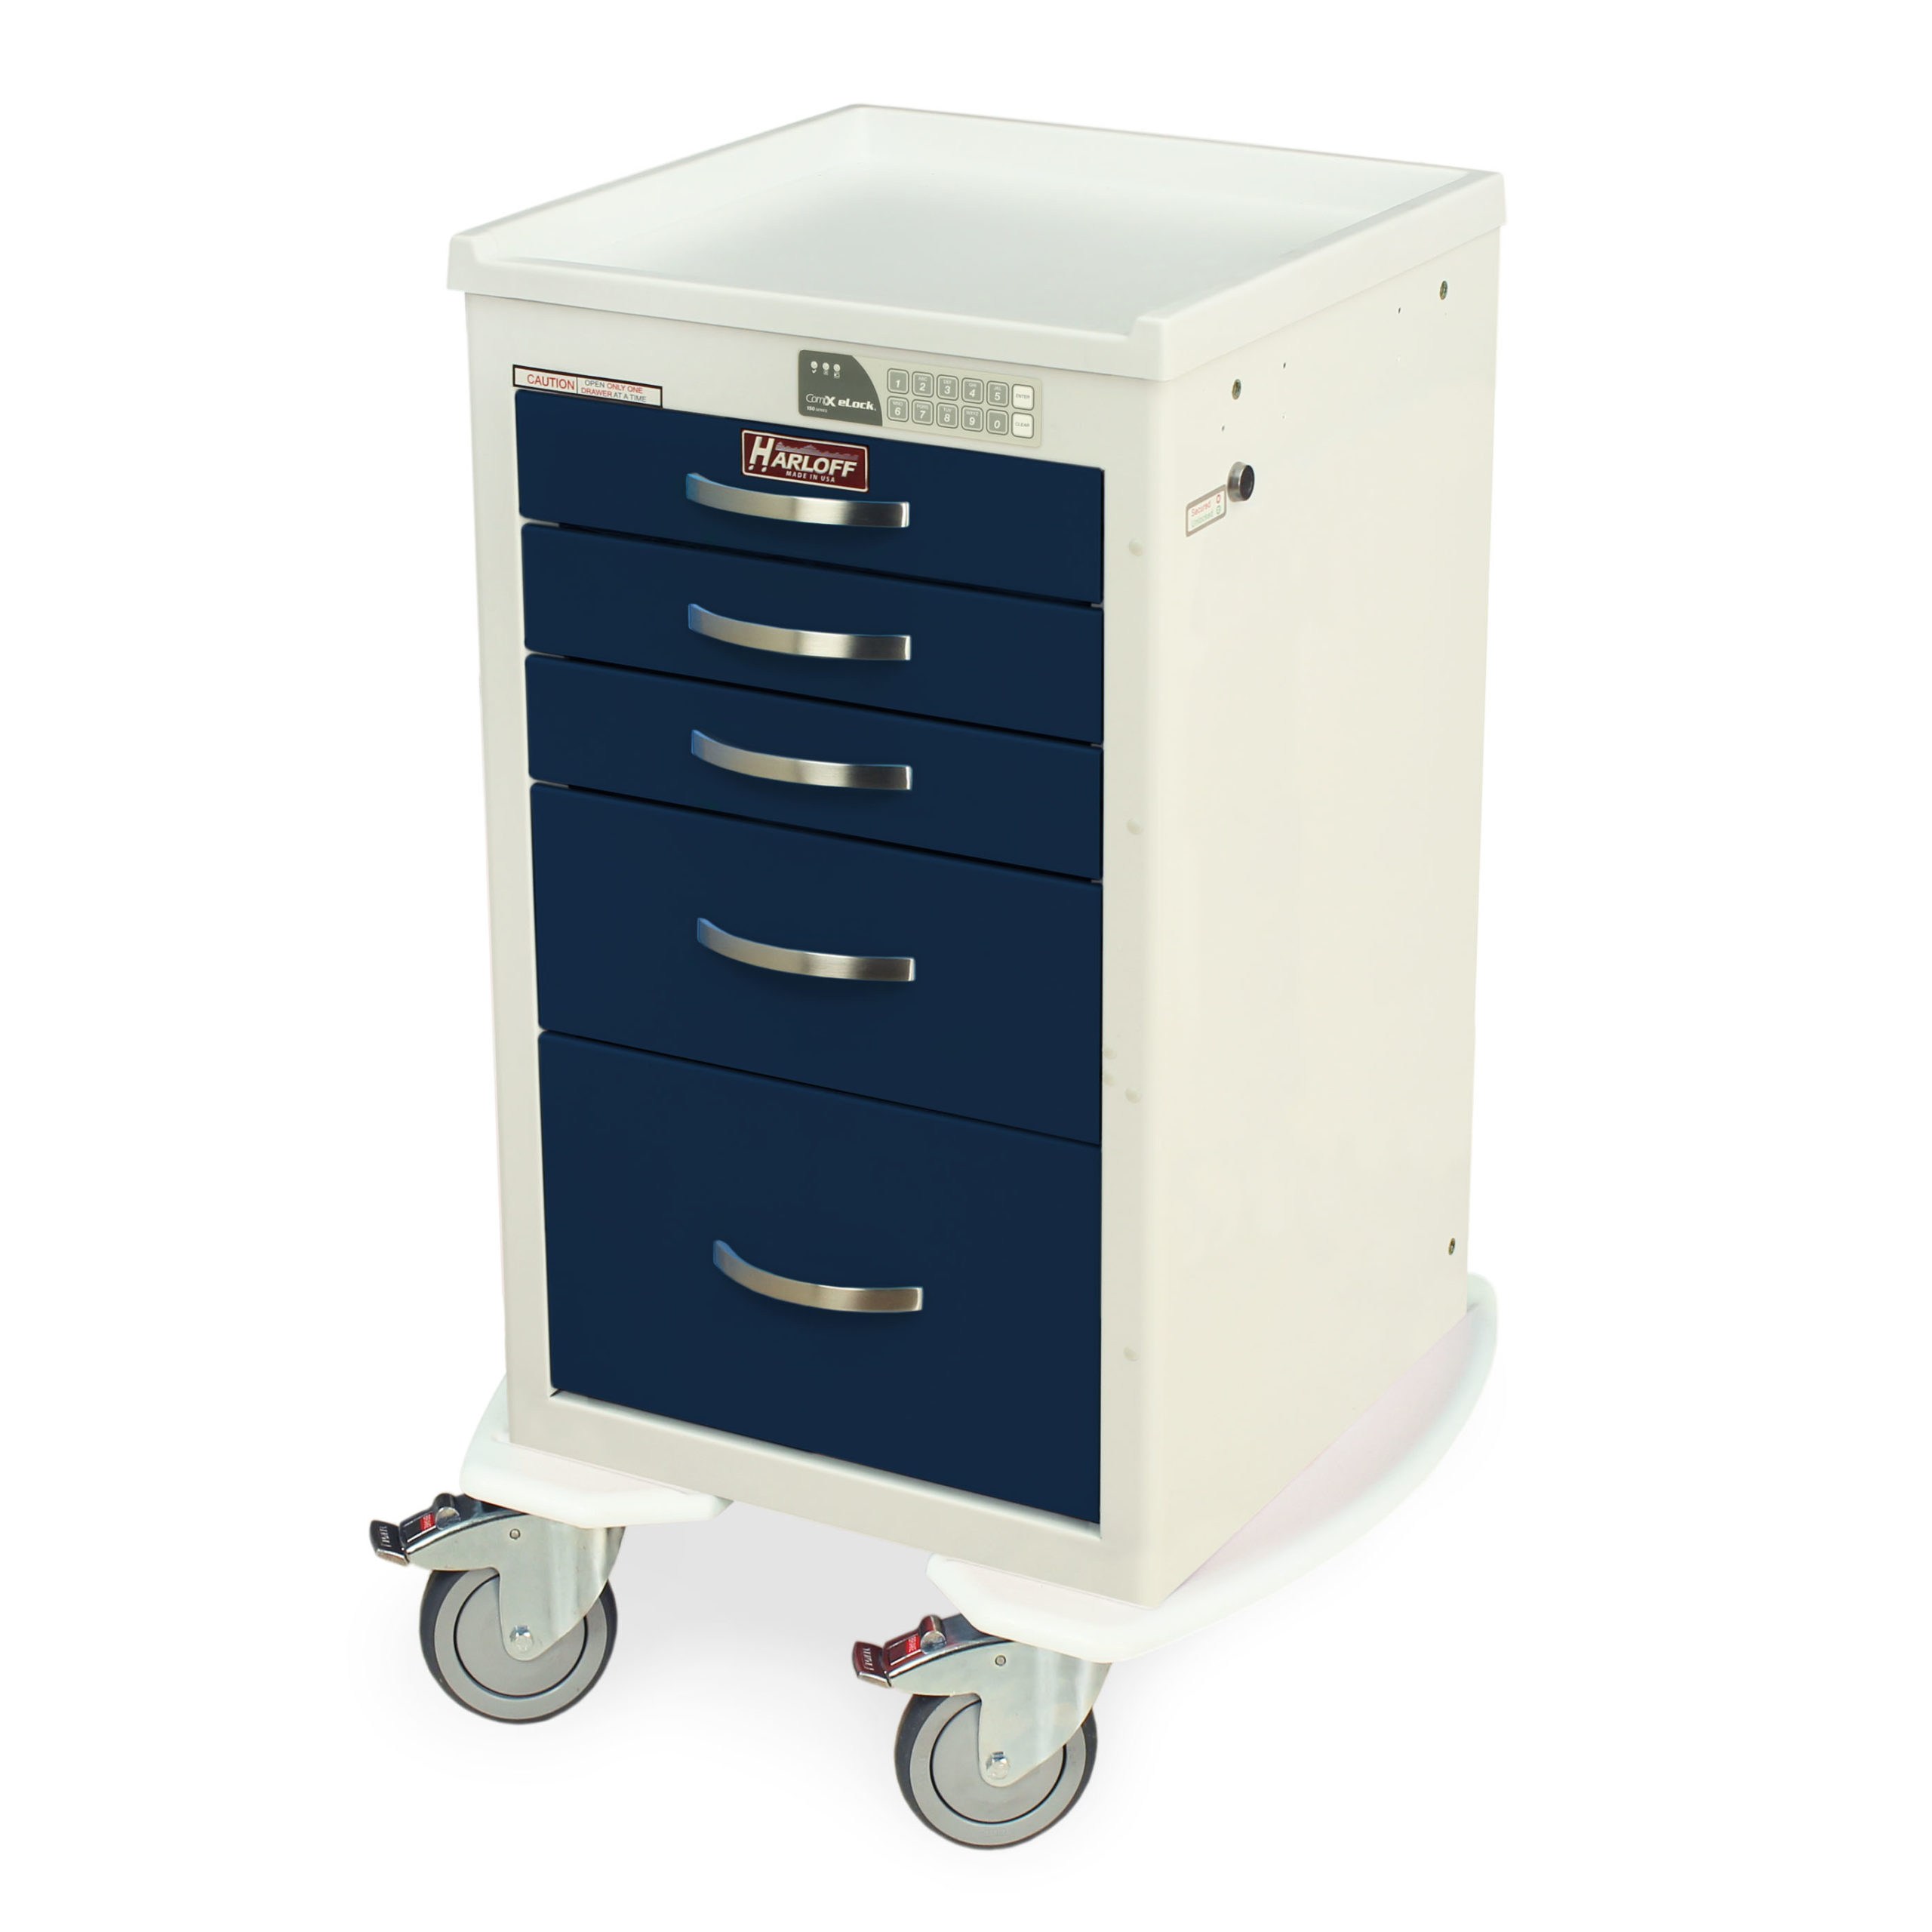 Short Anesthesia Procedure Cart, 37.25 x 23.875 x 22 Inch Size